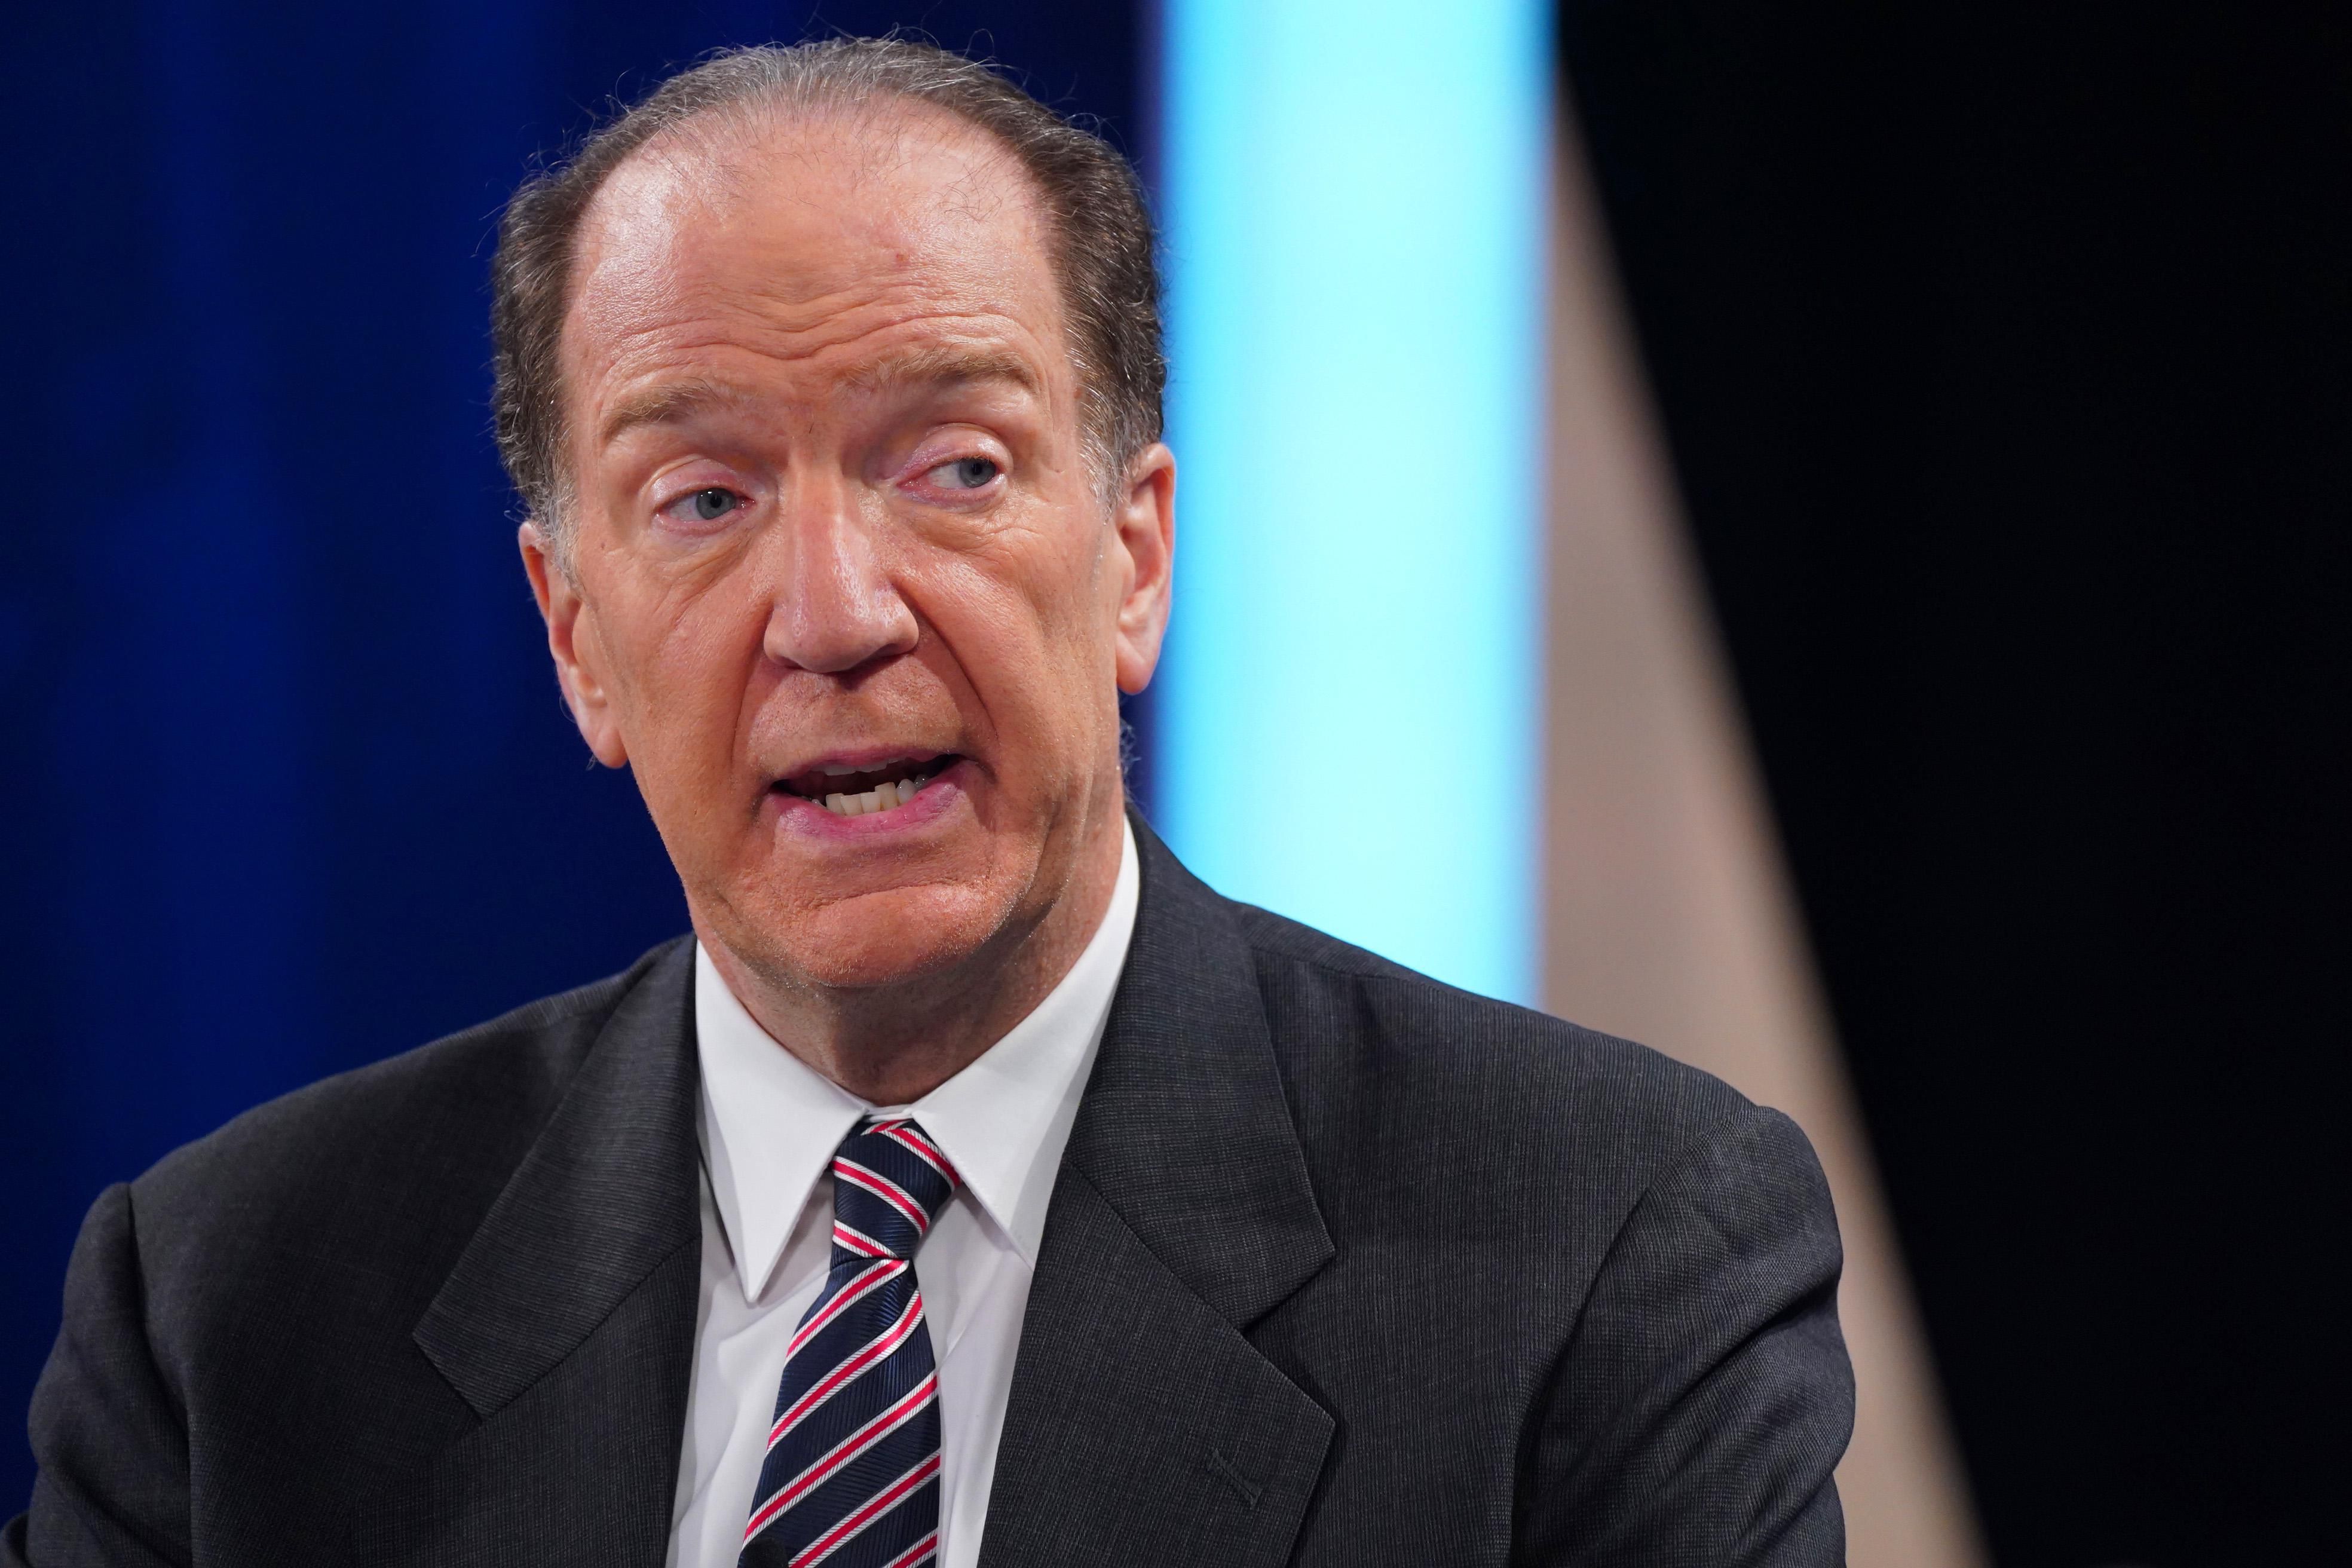 World Bank President David Malpass speaks at the Concordia Annual Summit on September 19, 2022 in New York City.